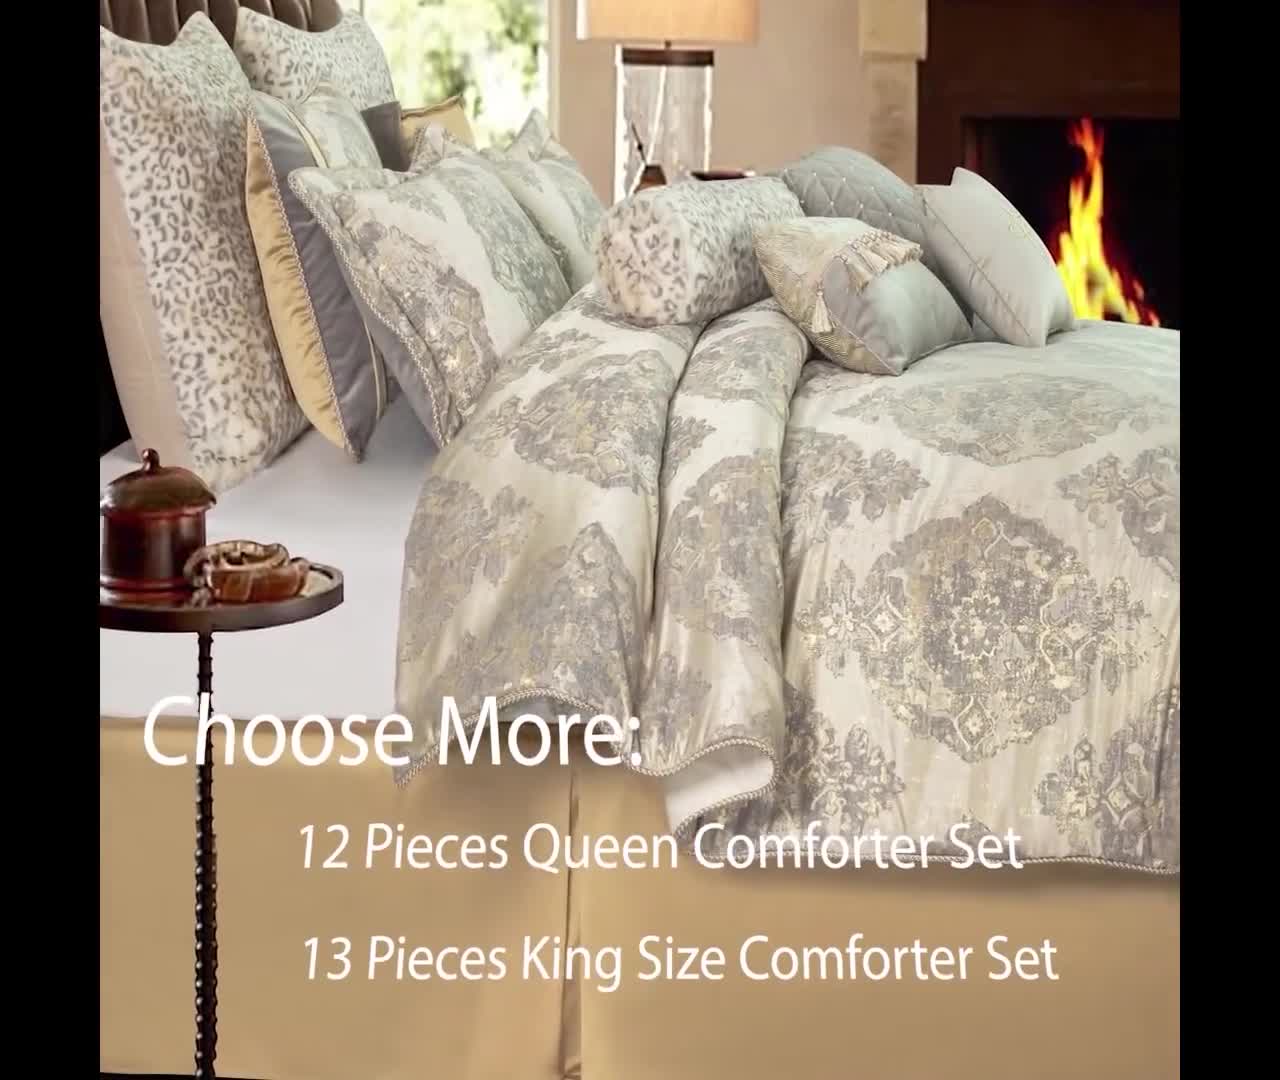 Luxury Bedding Sets: Queen, King & More